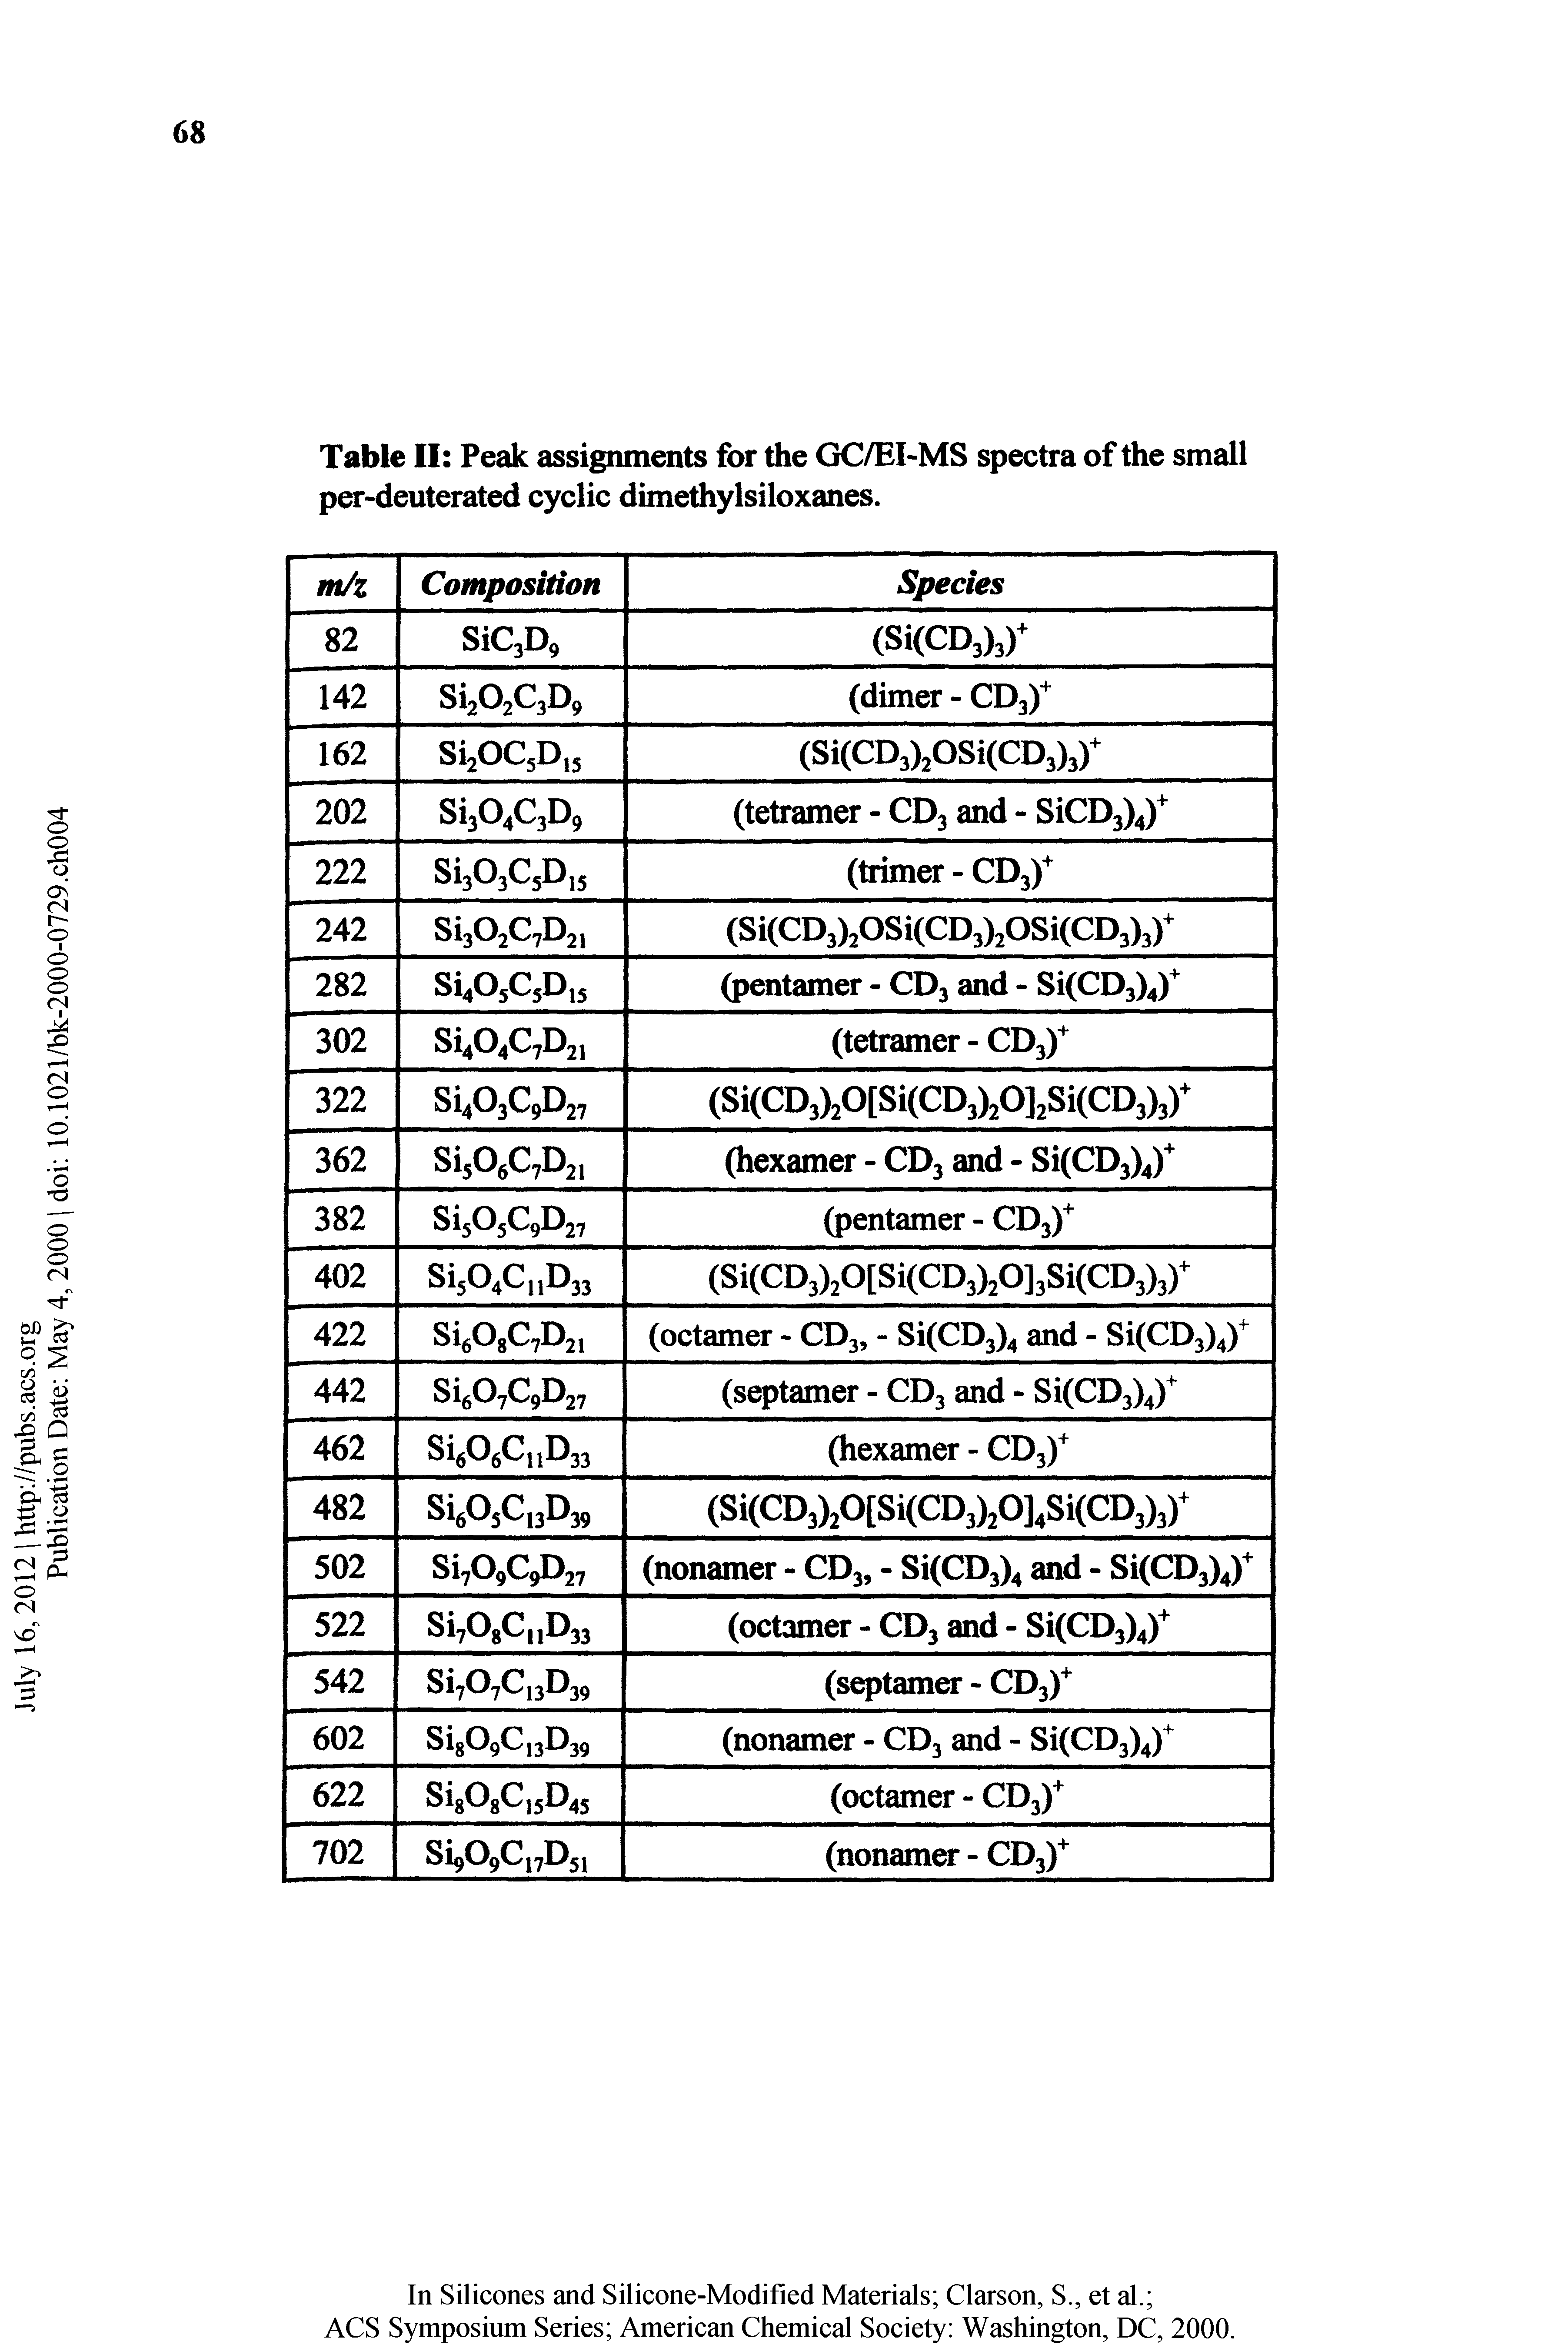 Table II Peak assignments for the GC/EI-MS spectra of the small per-deuterated cyclic dimethylsiloxanes.